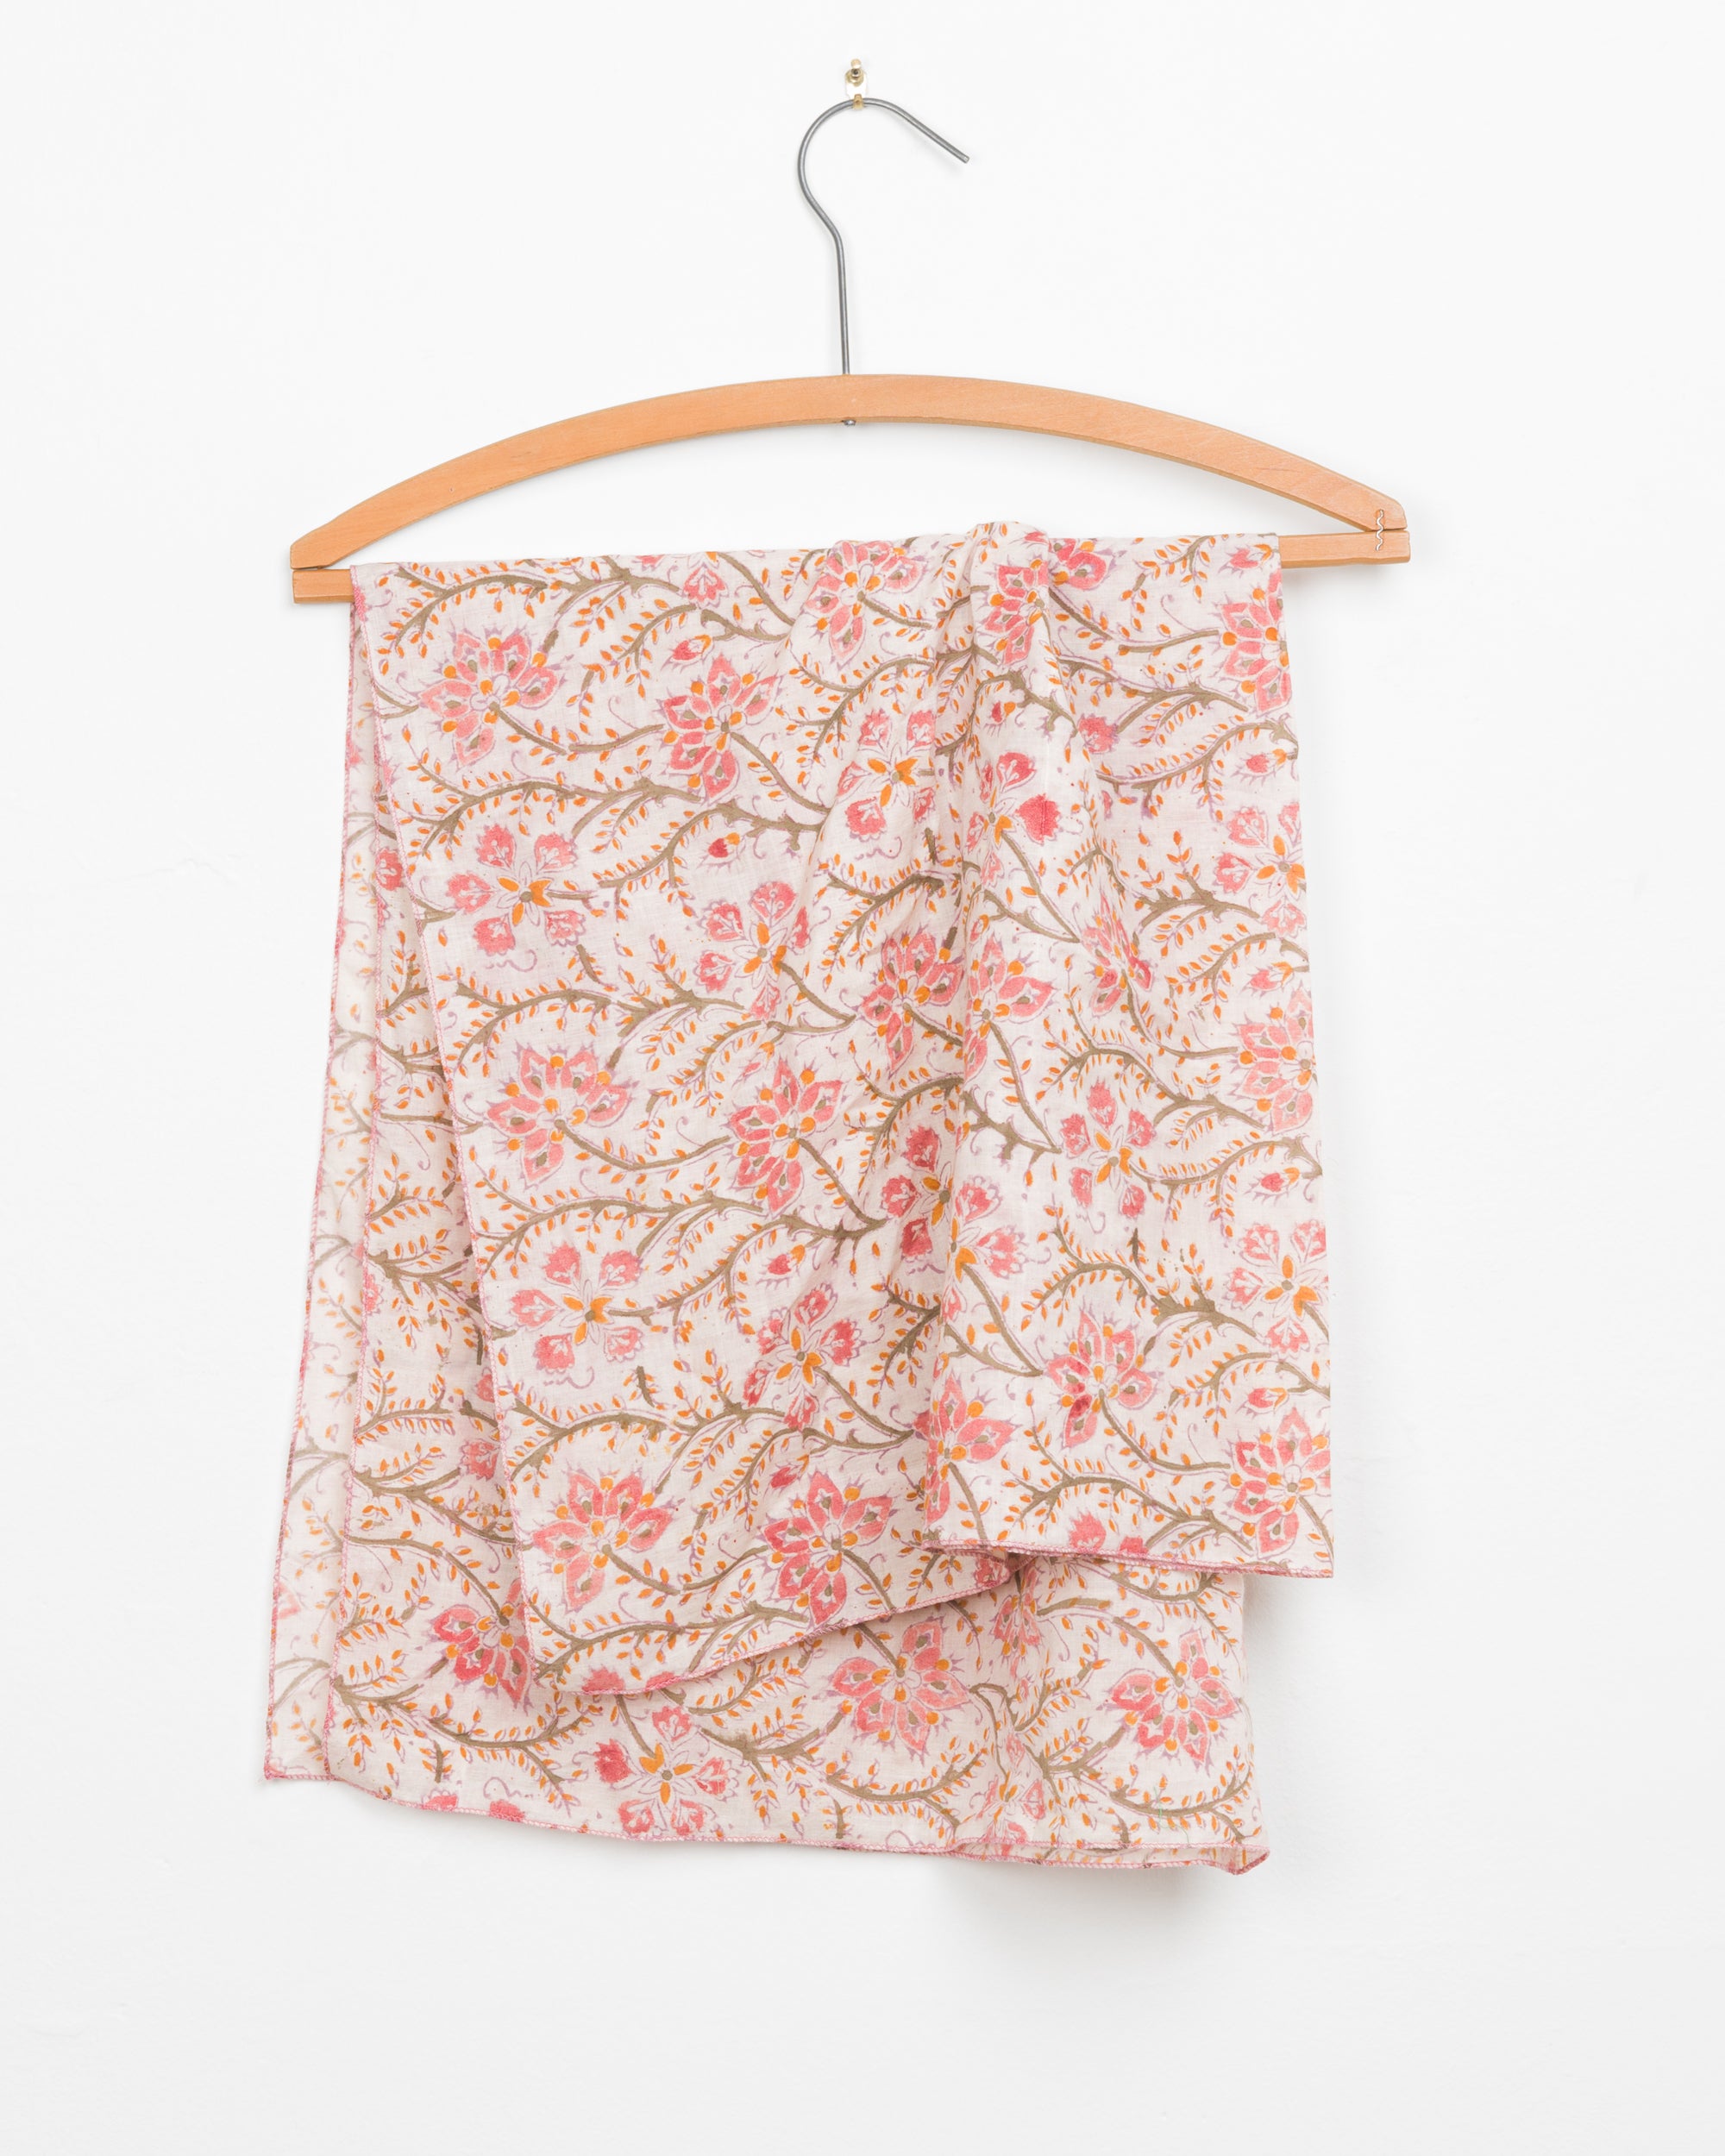 Scarf in Pink Floral Block